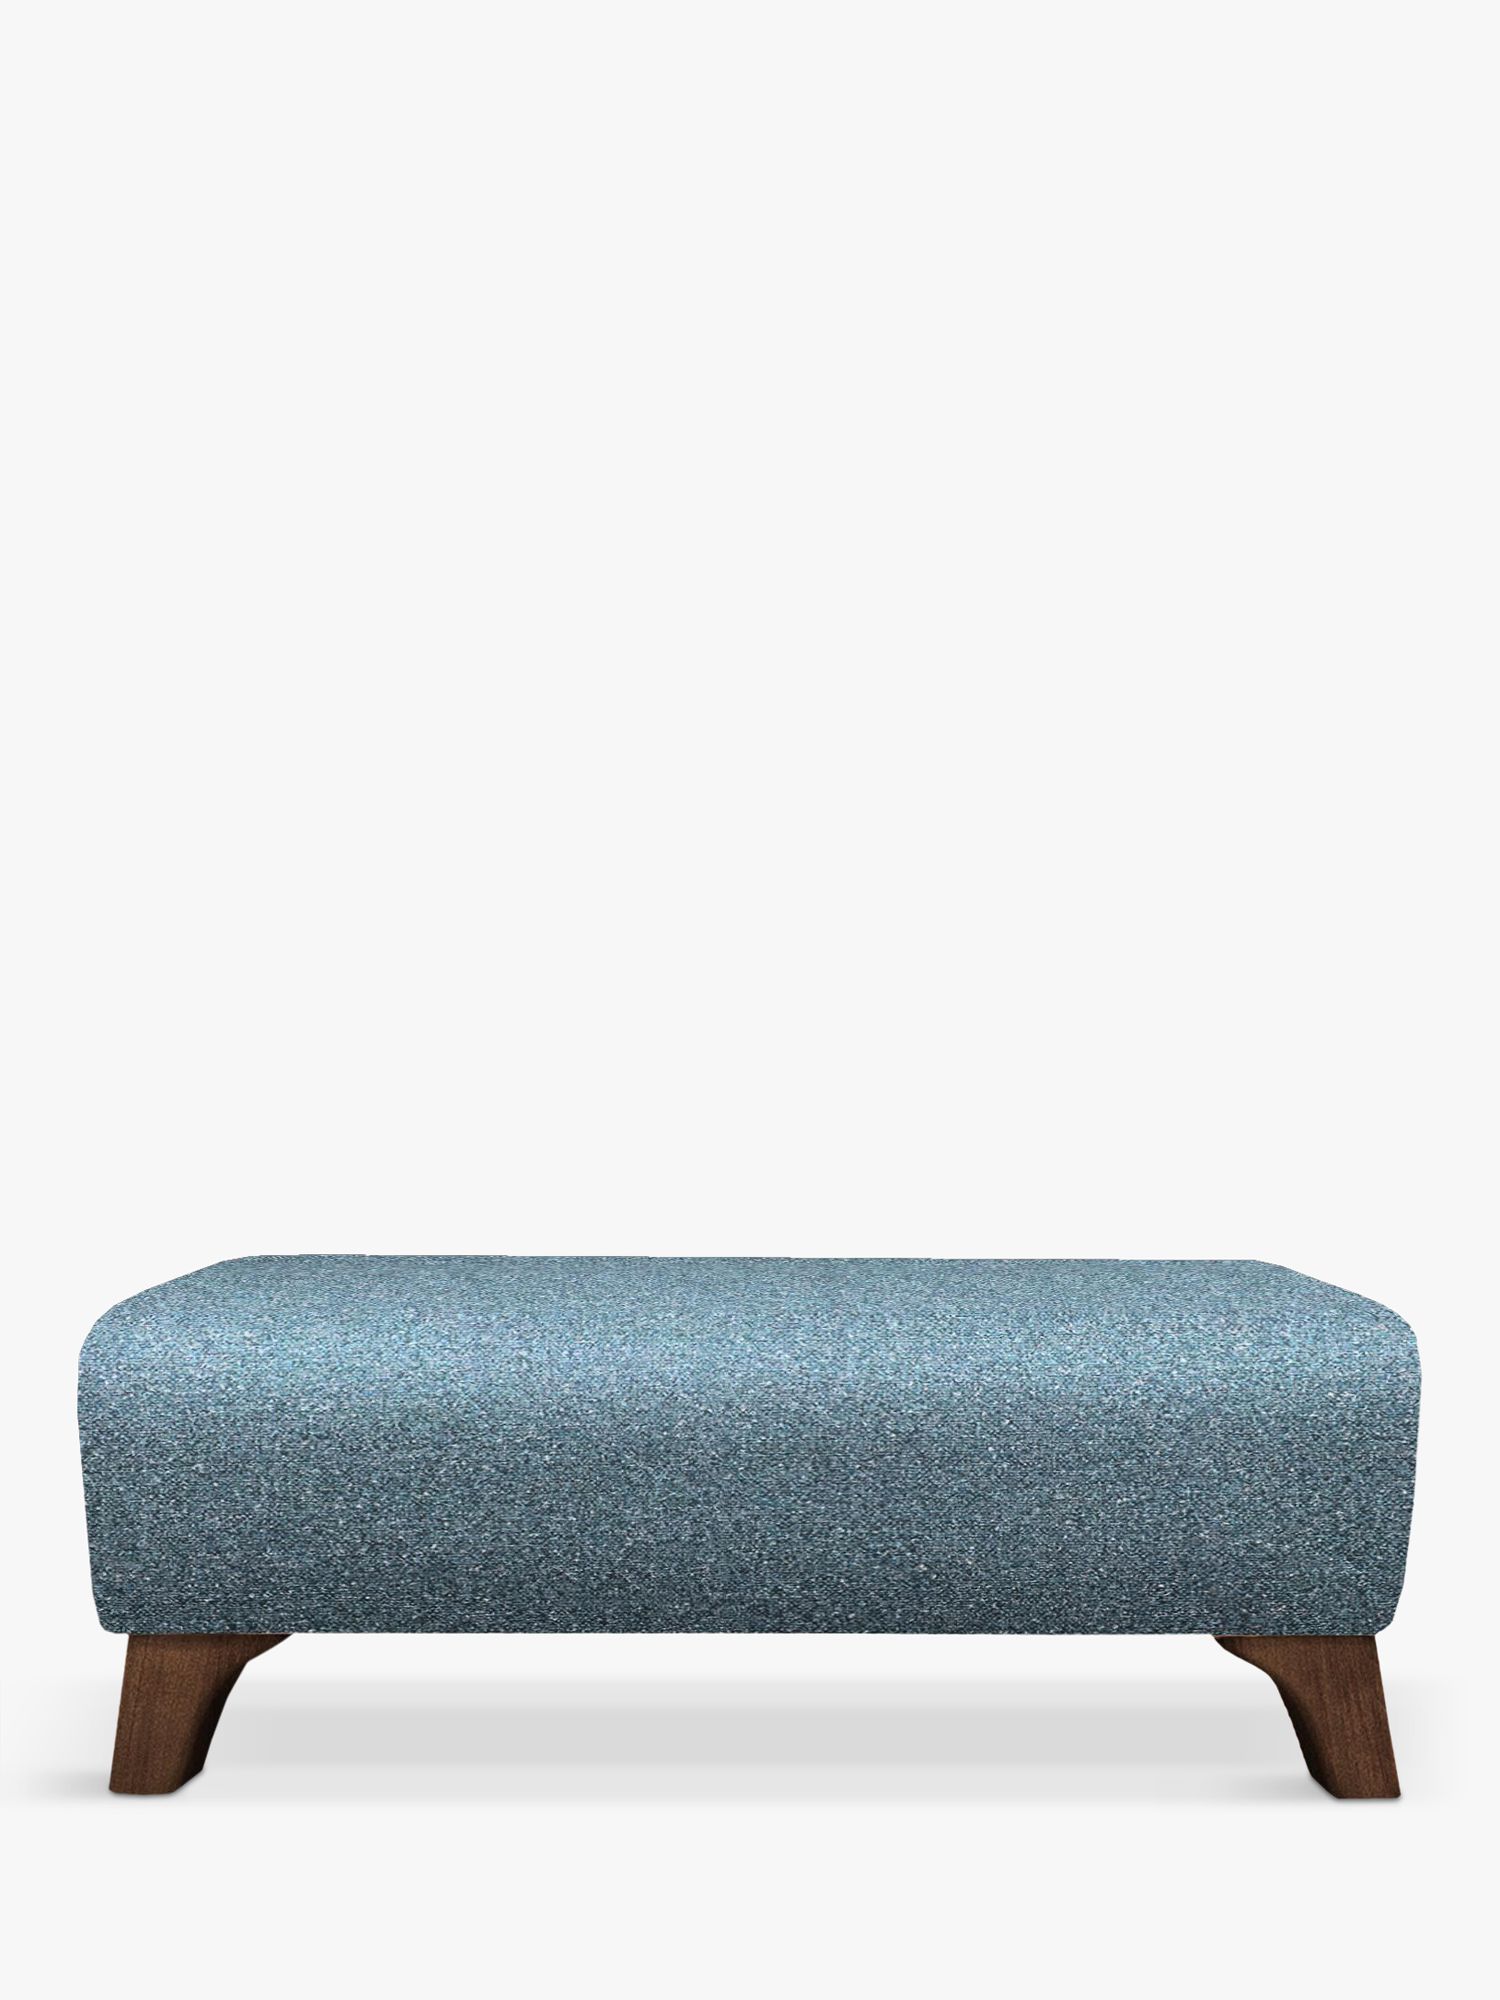 G Plan Vintage The Sixty Eight Footstool